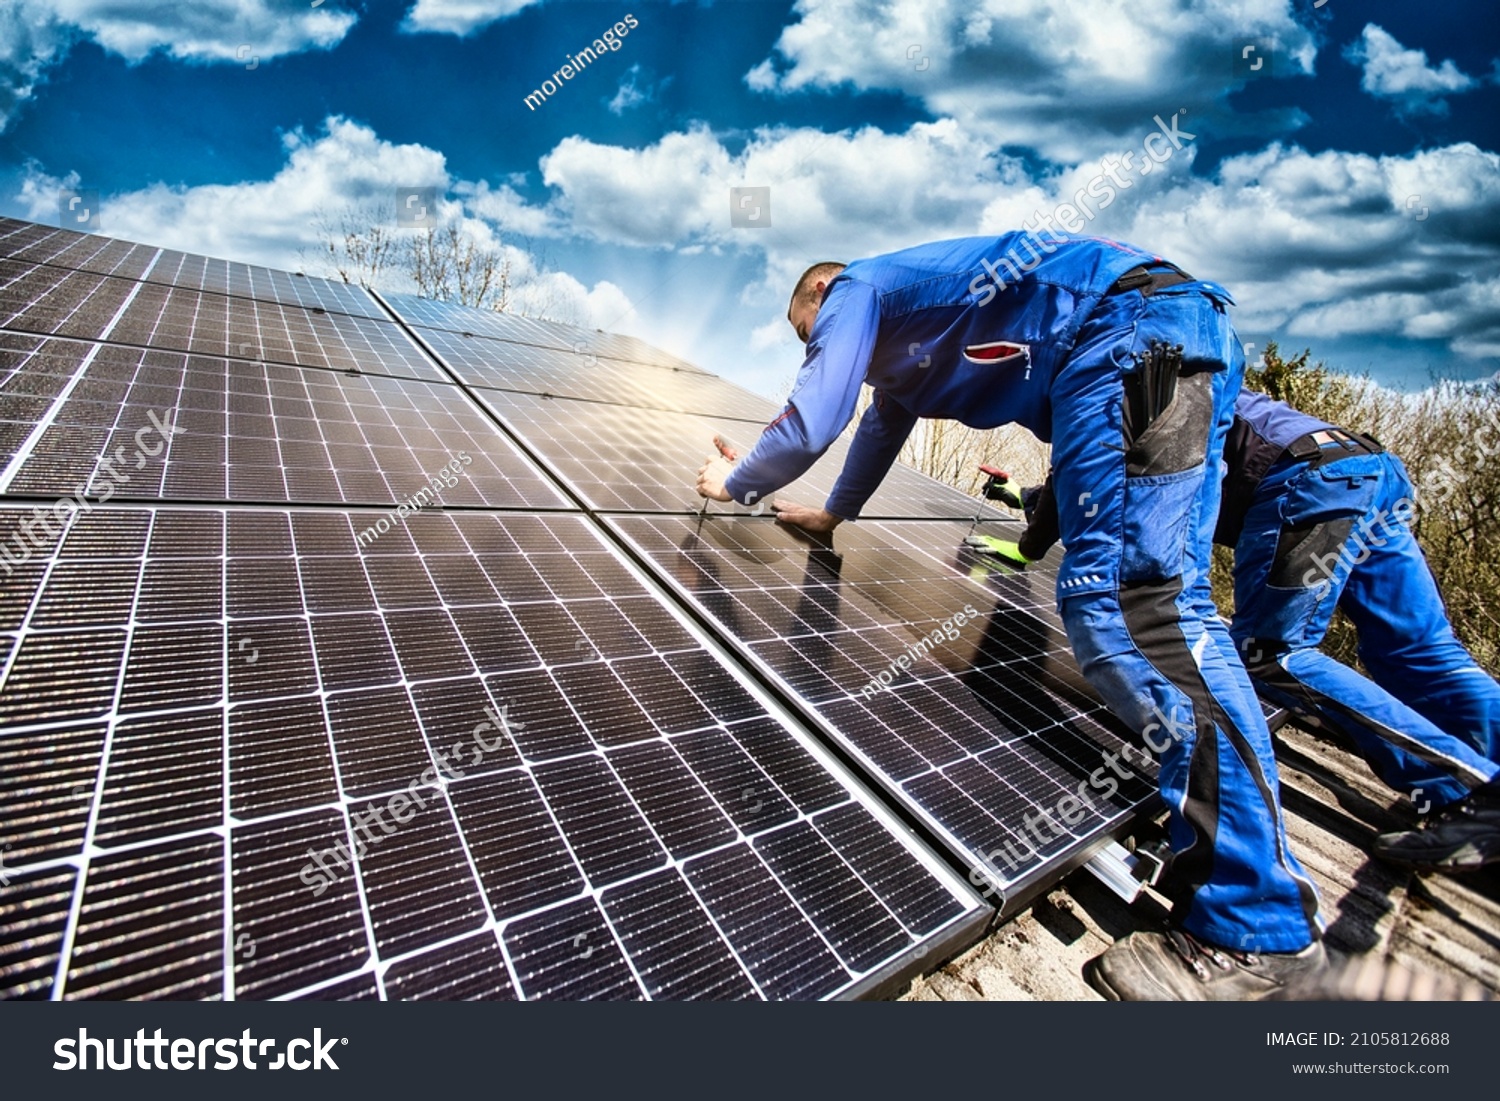 Installing solar photovoltaic panel system. Solar panel technician installing solar panels on roof. Alternative energy ecological concept. #2105812688